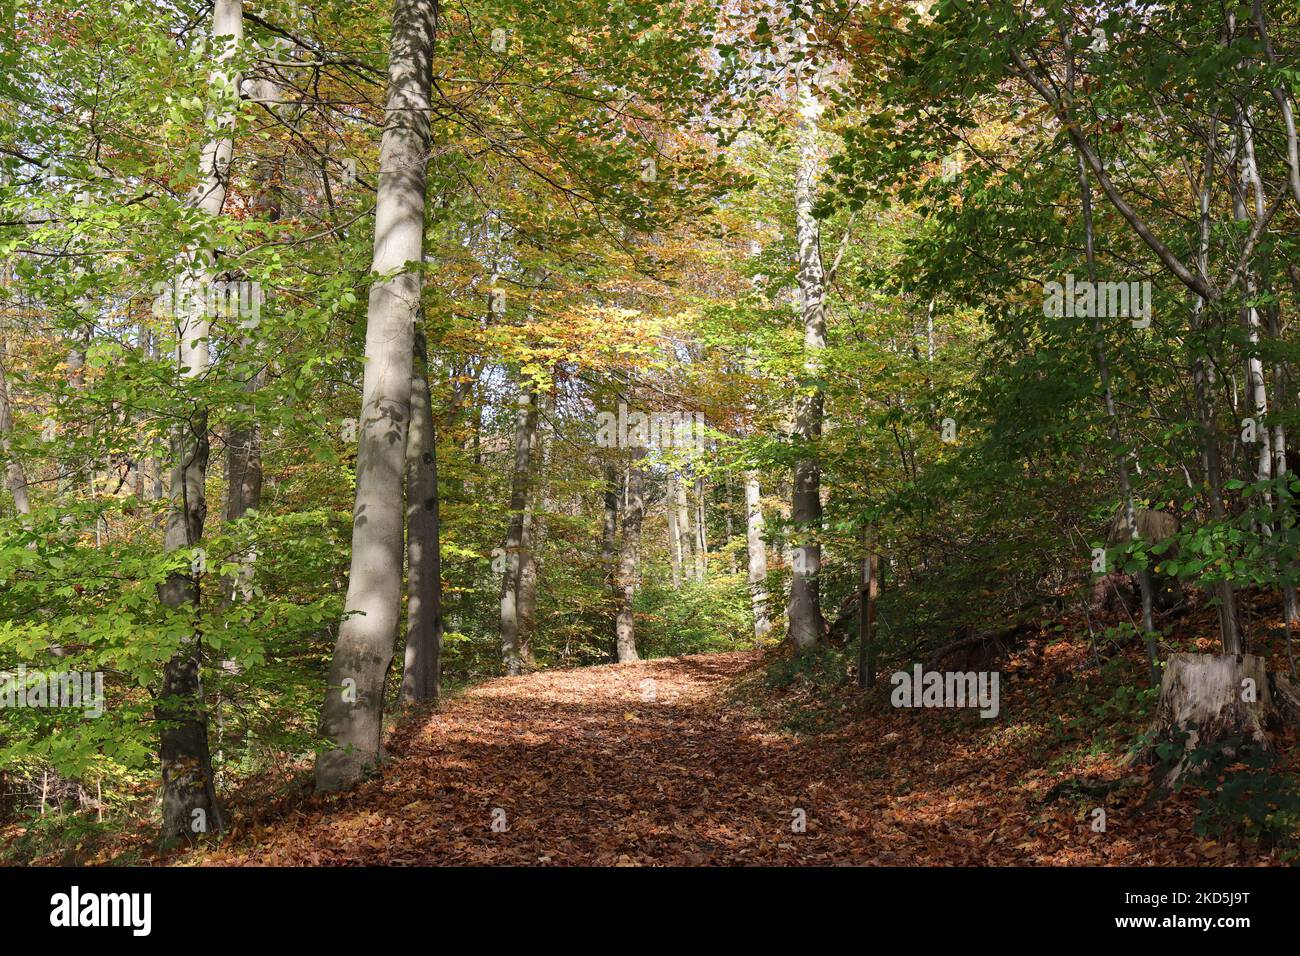 a path full of golden-brown fallen leaves leads through the colorful sunlit autumn forest Stock Photo